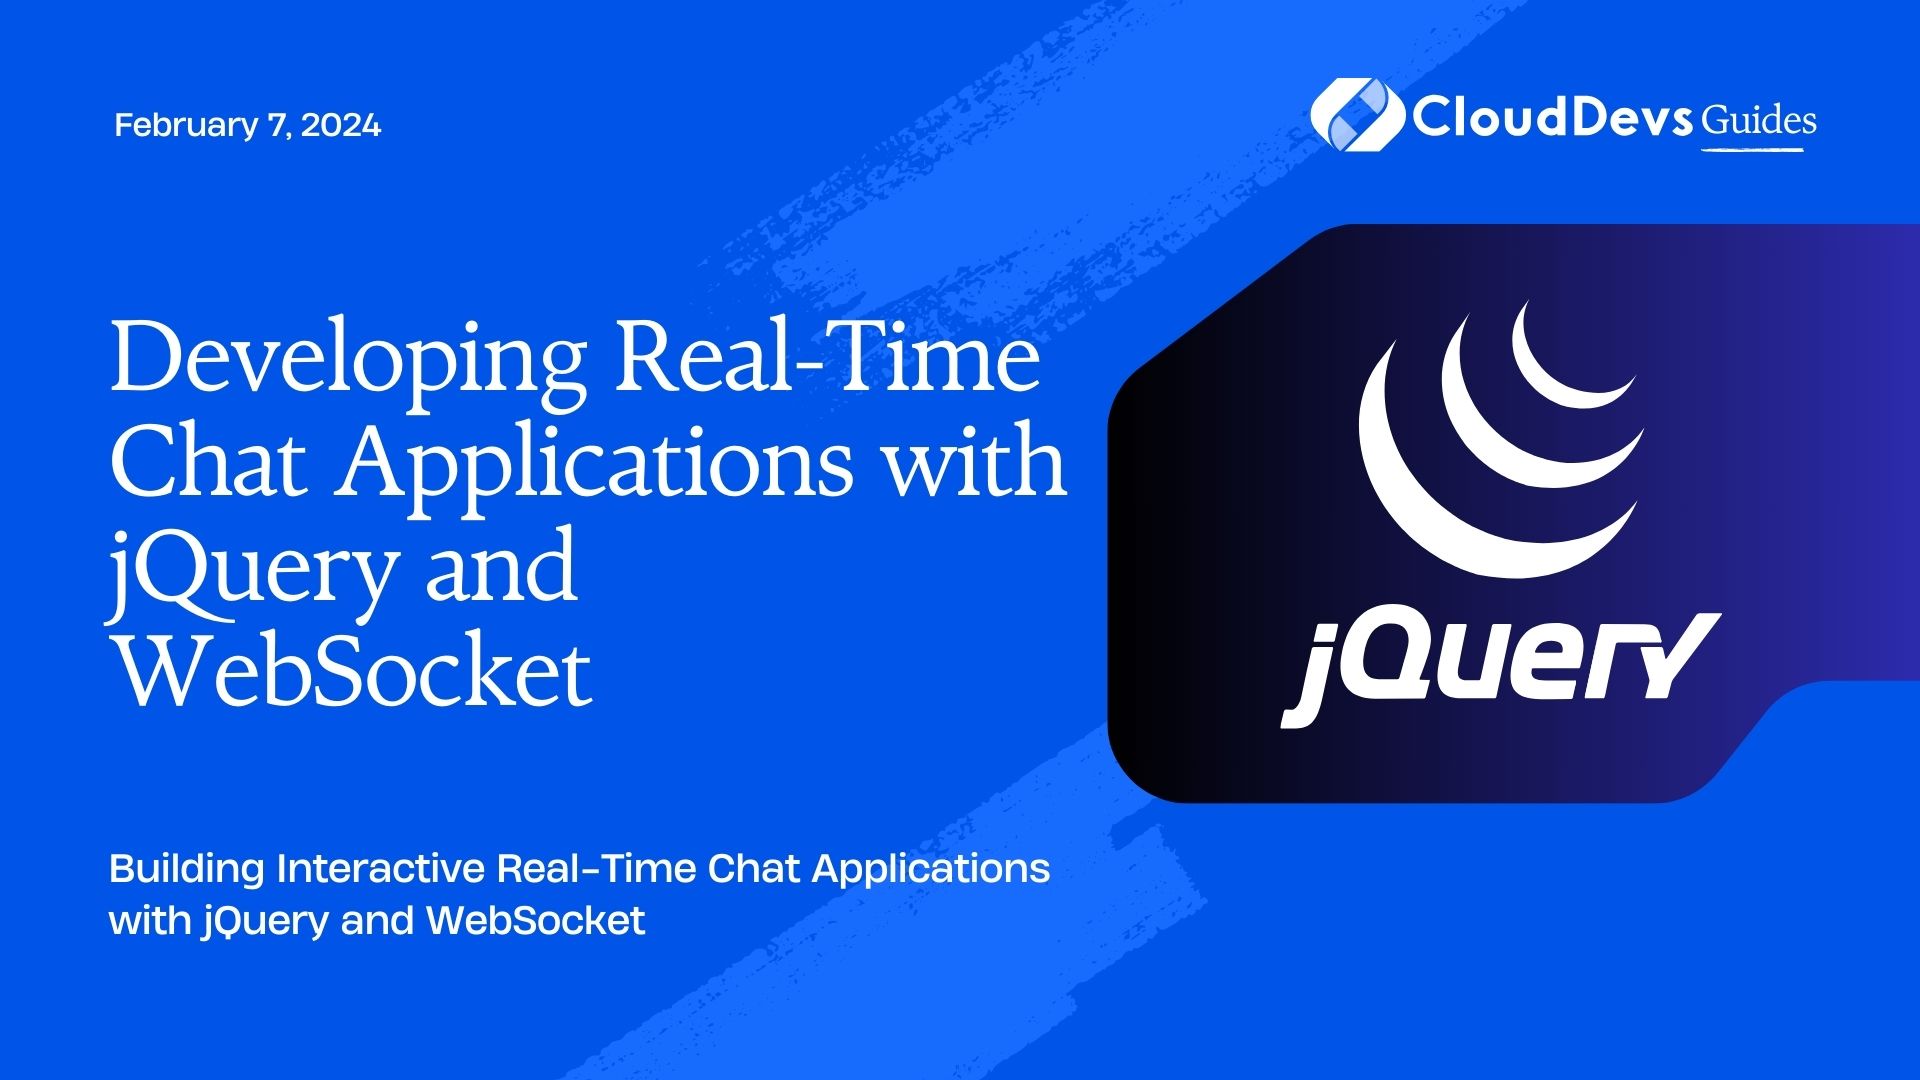 Developing Real-Time Chat Applications with jQuery and WebSocket